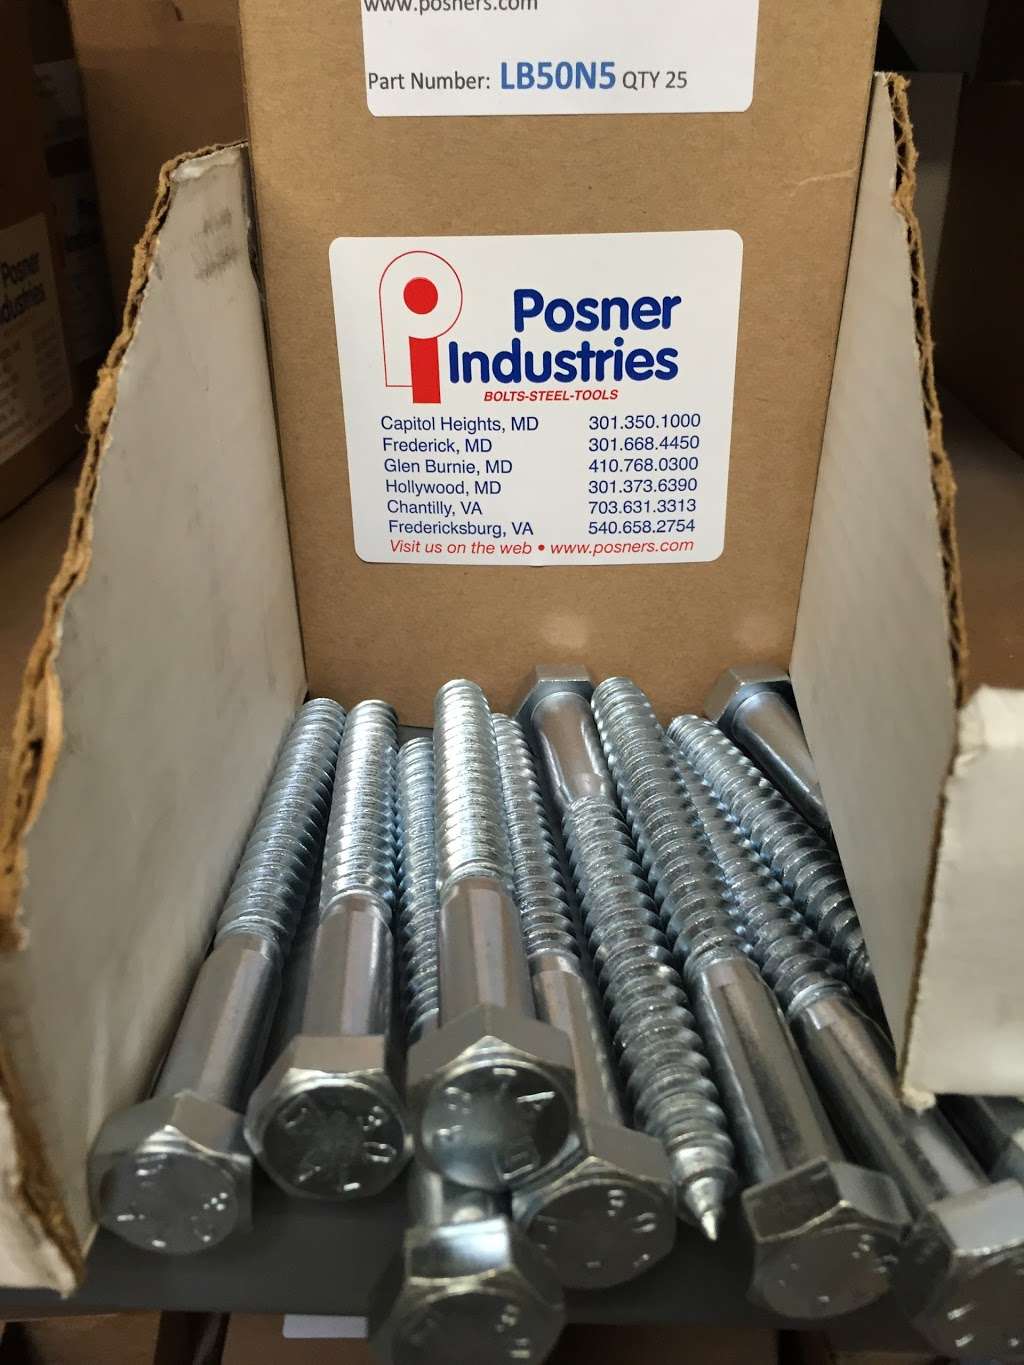 Posner Industries, Inc. - Frederick, MD | Wedgewood Blvd, Frederick, MD 21703, USA | Phone: (301) 668-4450